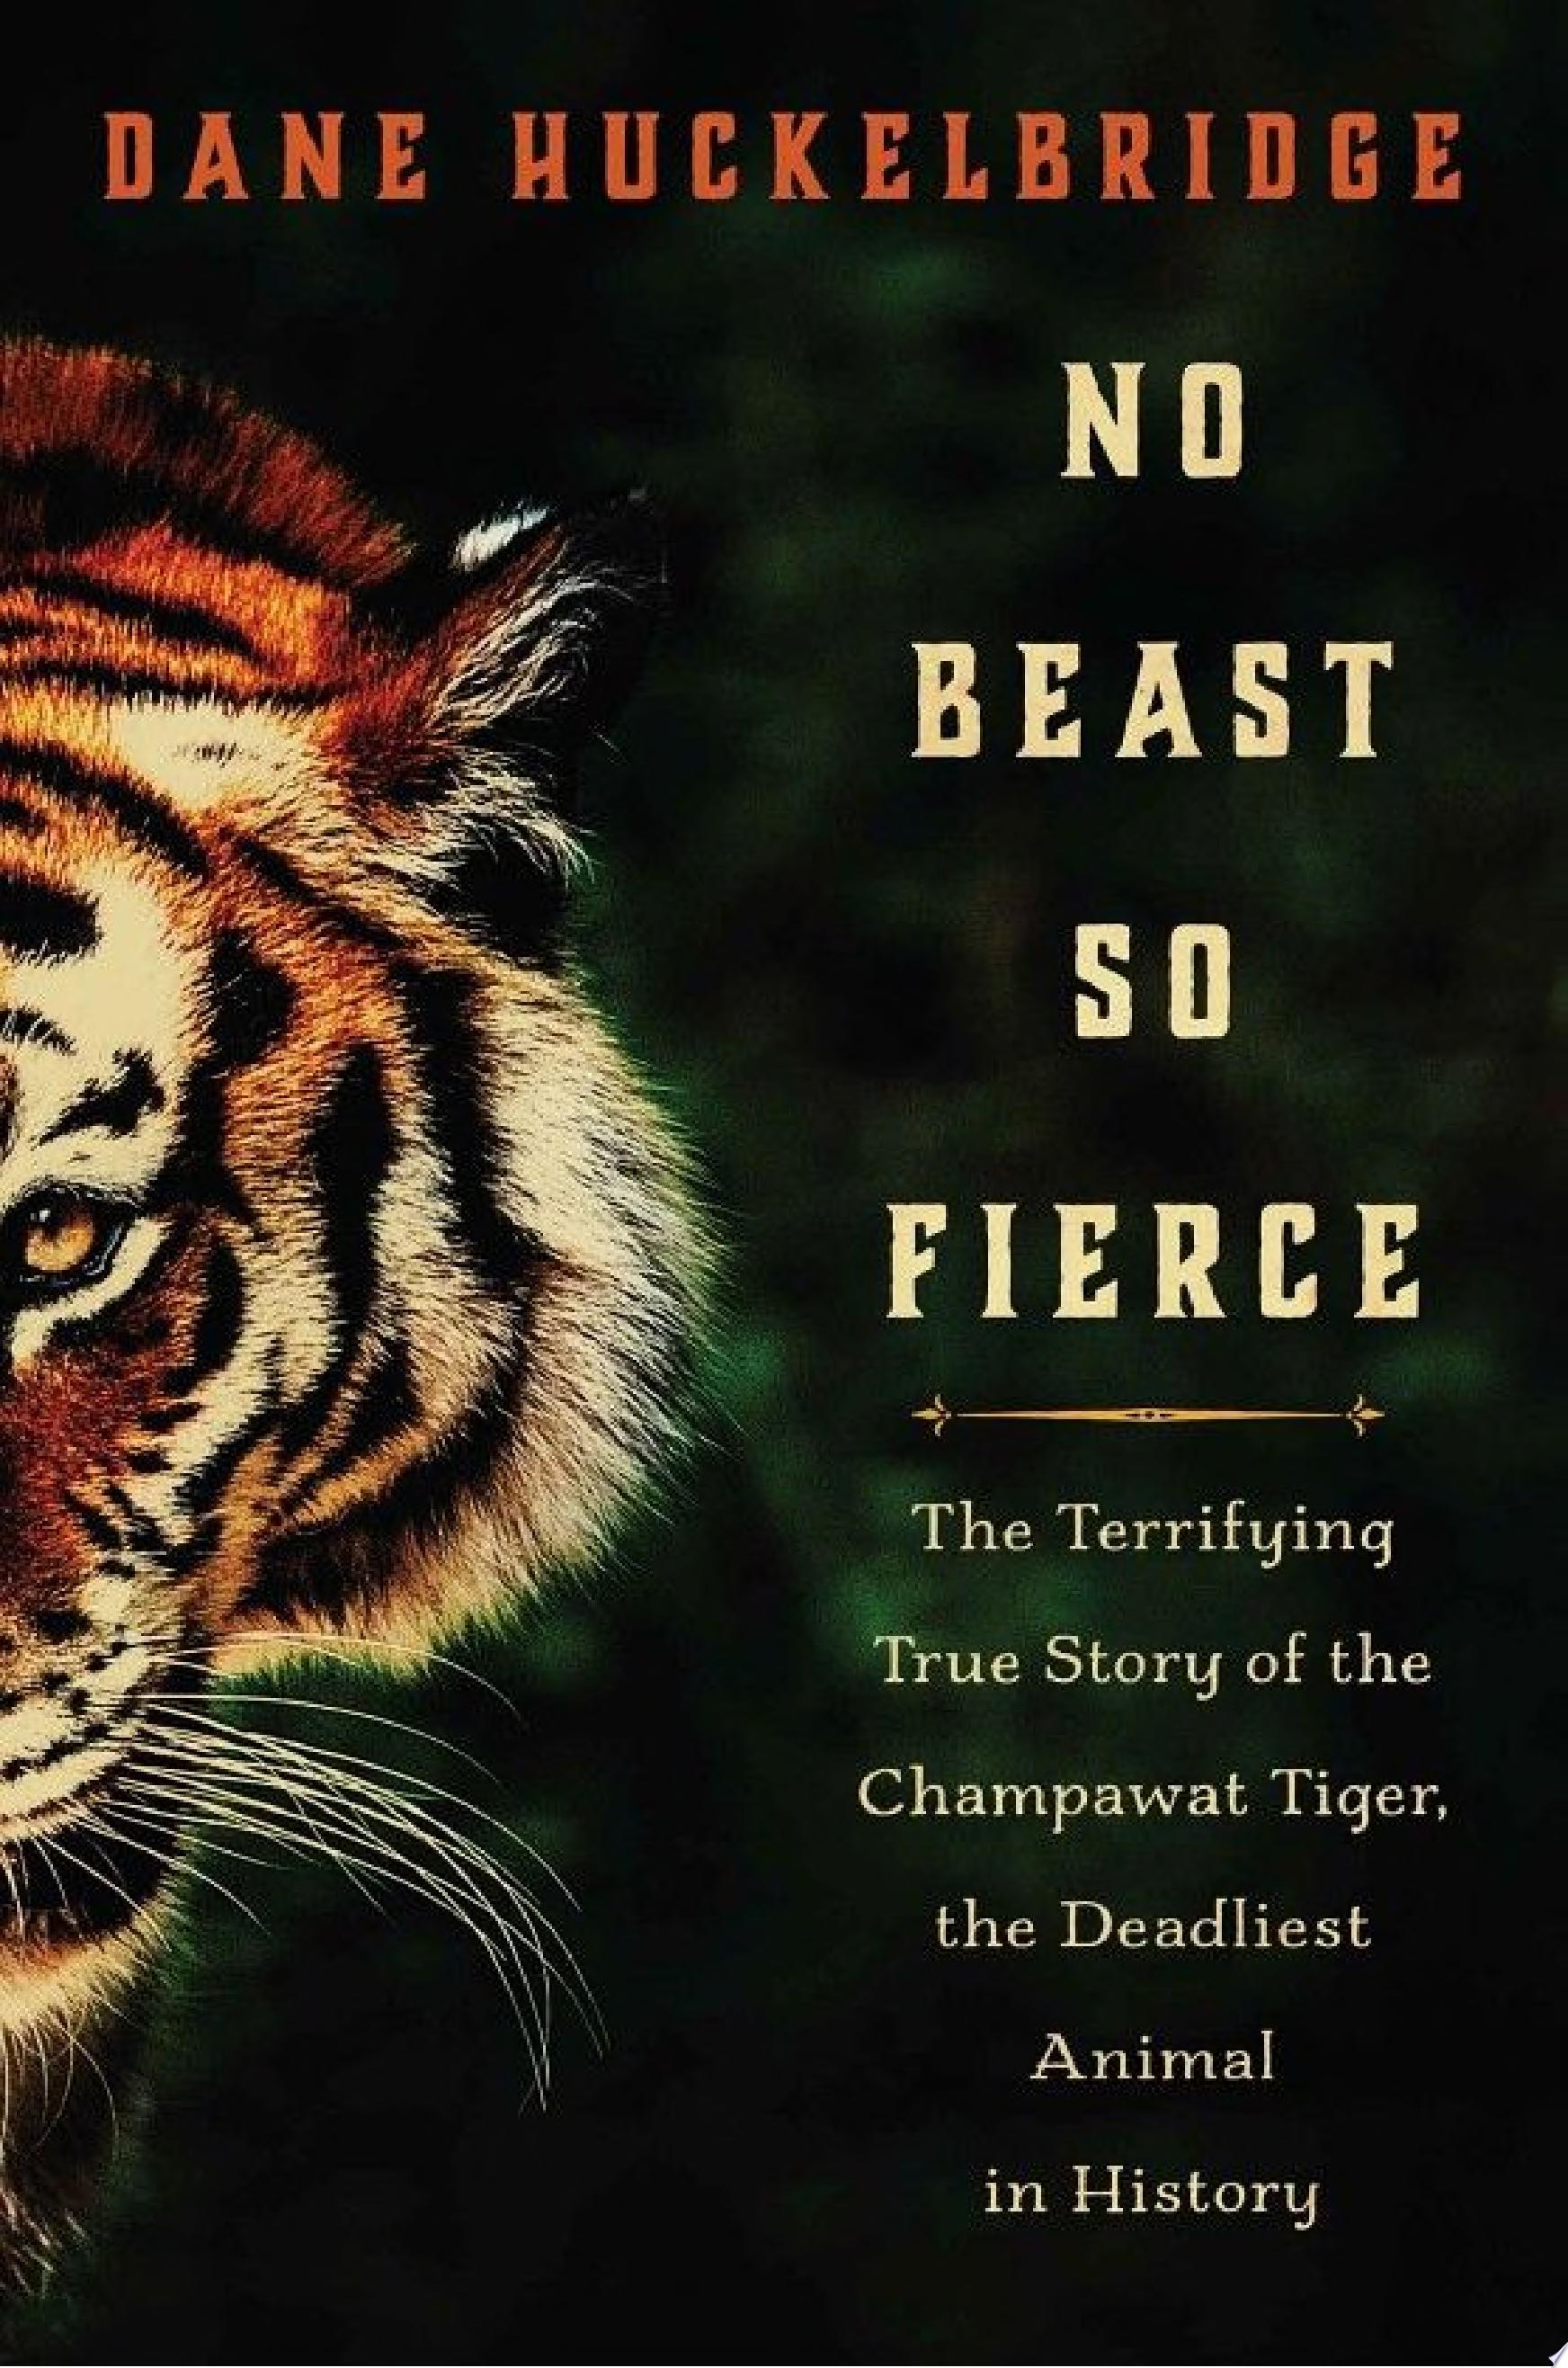 Image for "No Beast So Fierce"